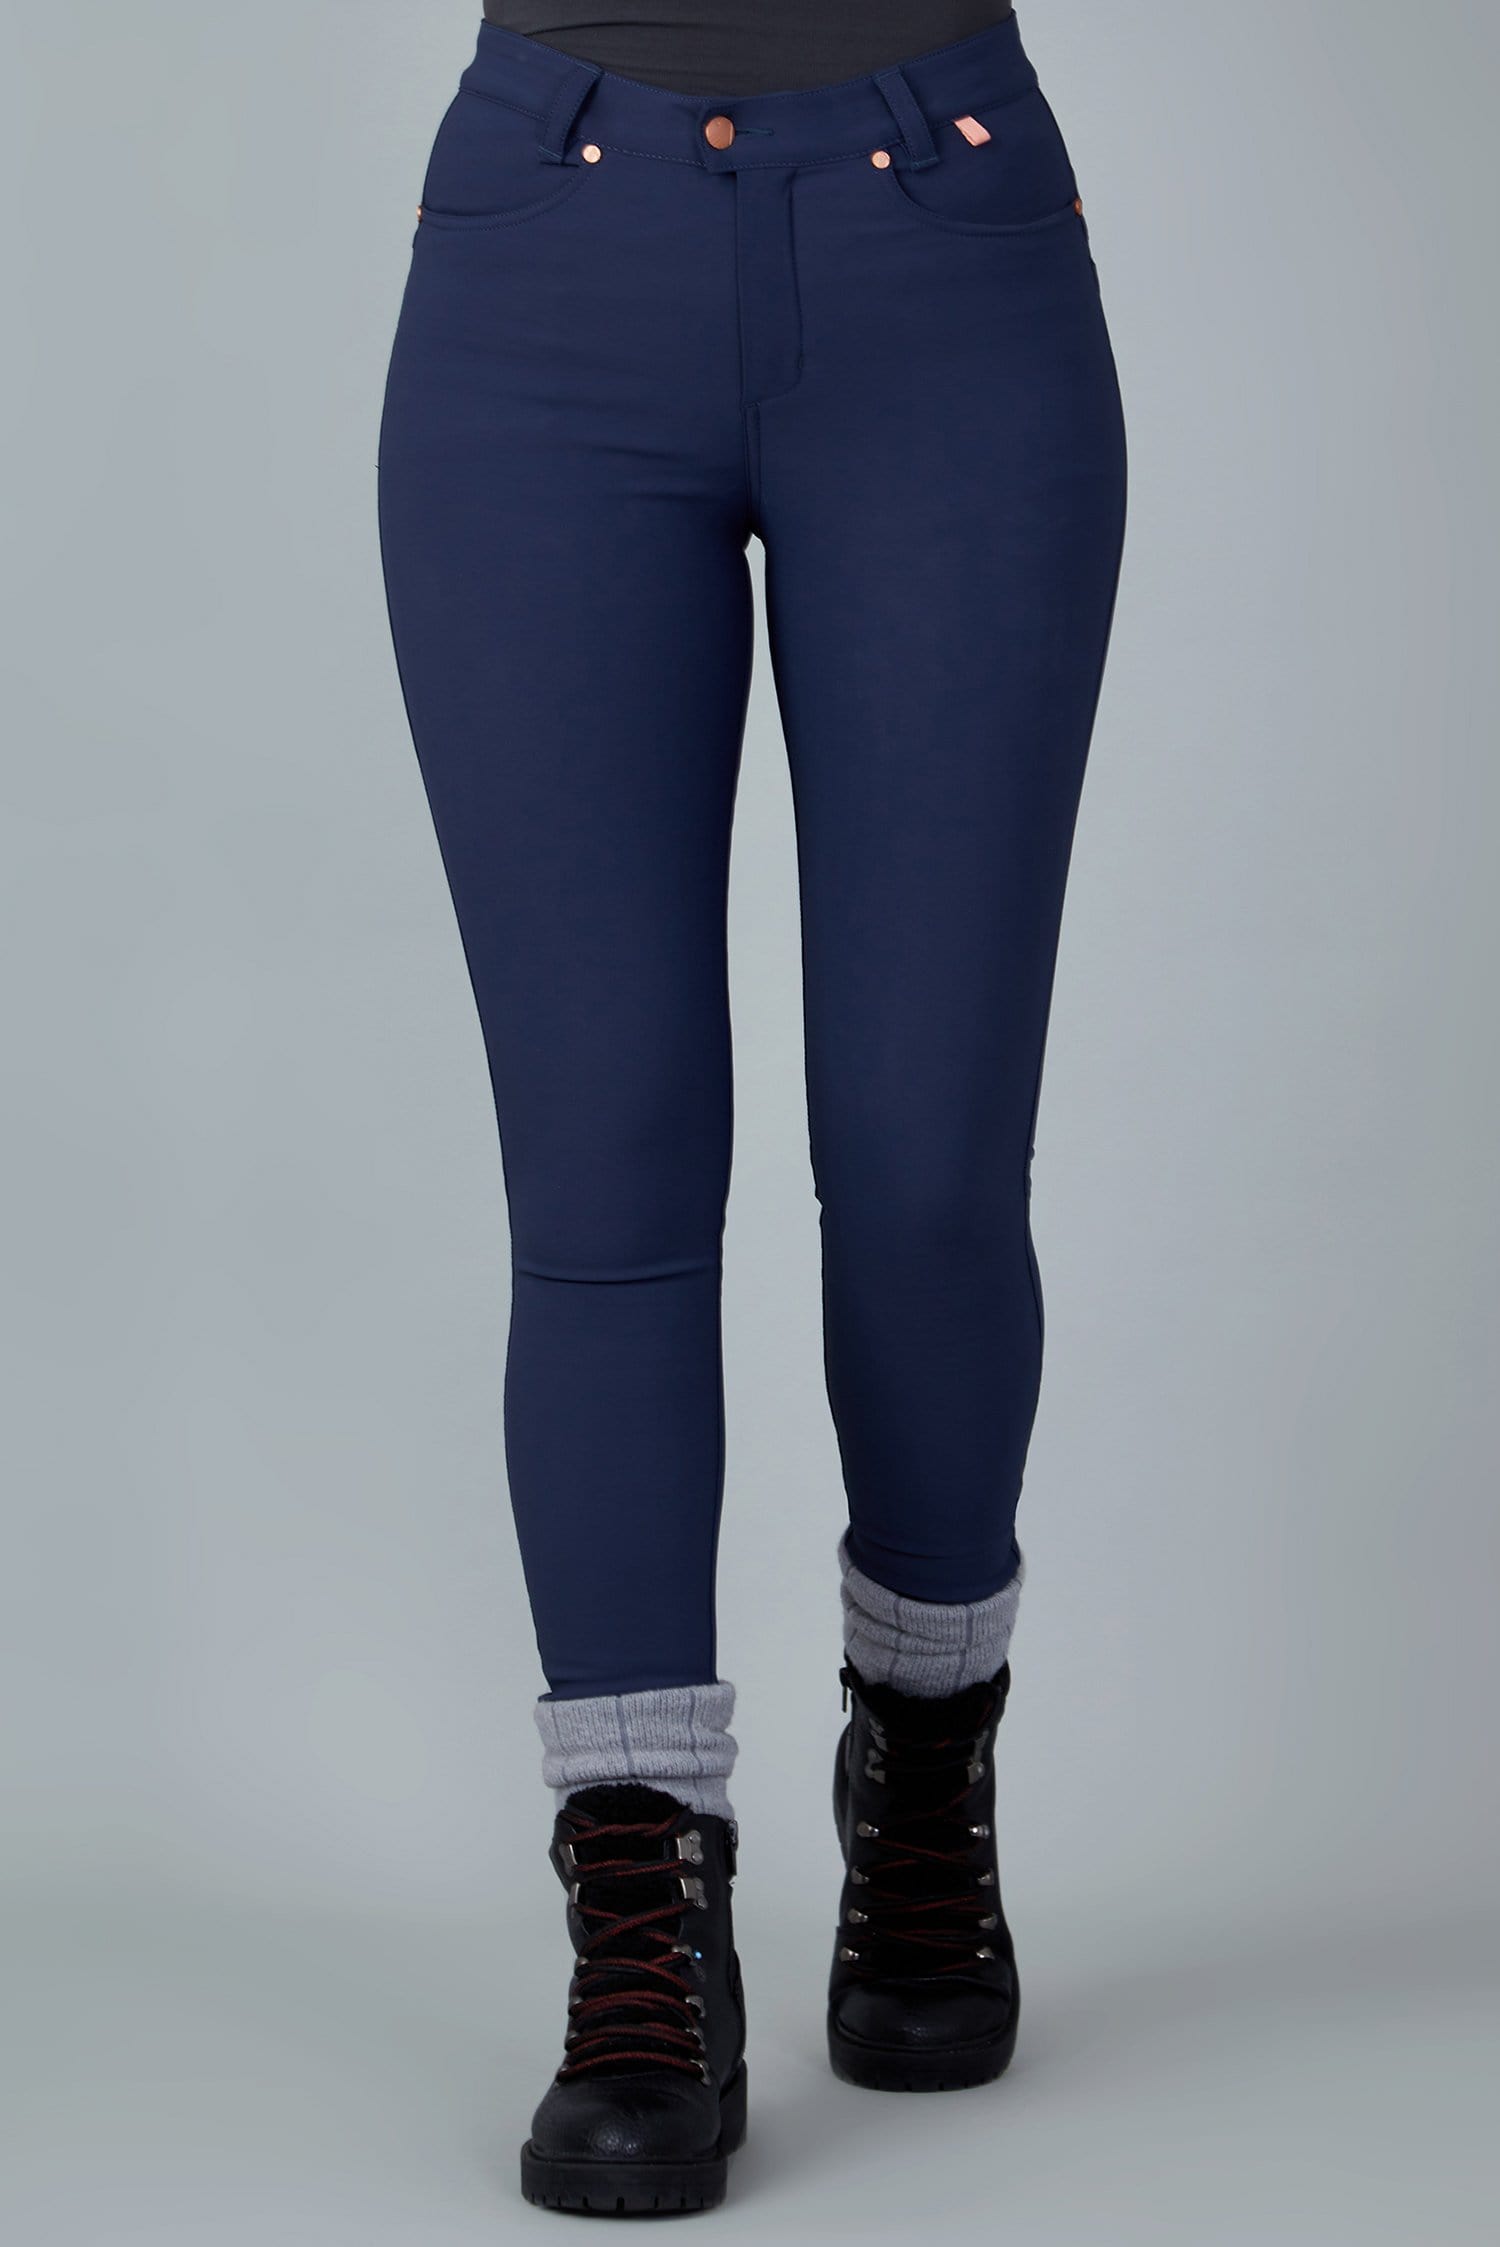 The Aventurite Stretch Skinny Outdoor Trousers - Midnight Blue - 28p / Uk10 - Womens - Acai Outdoorwear